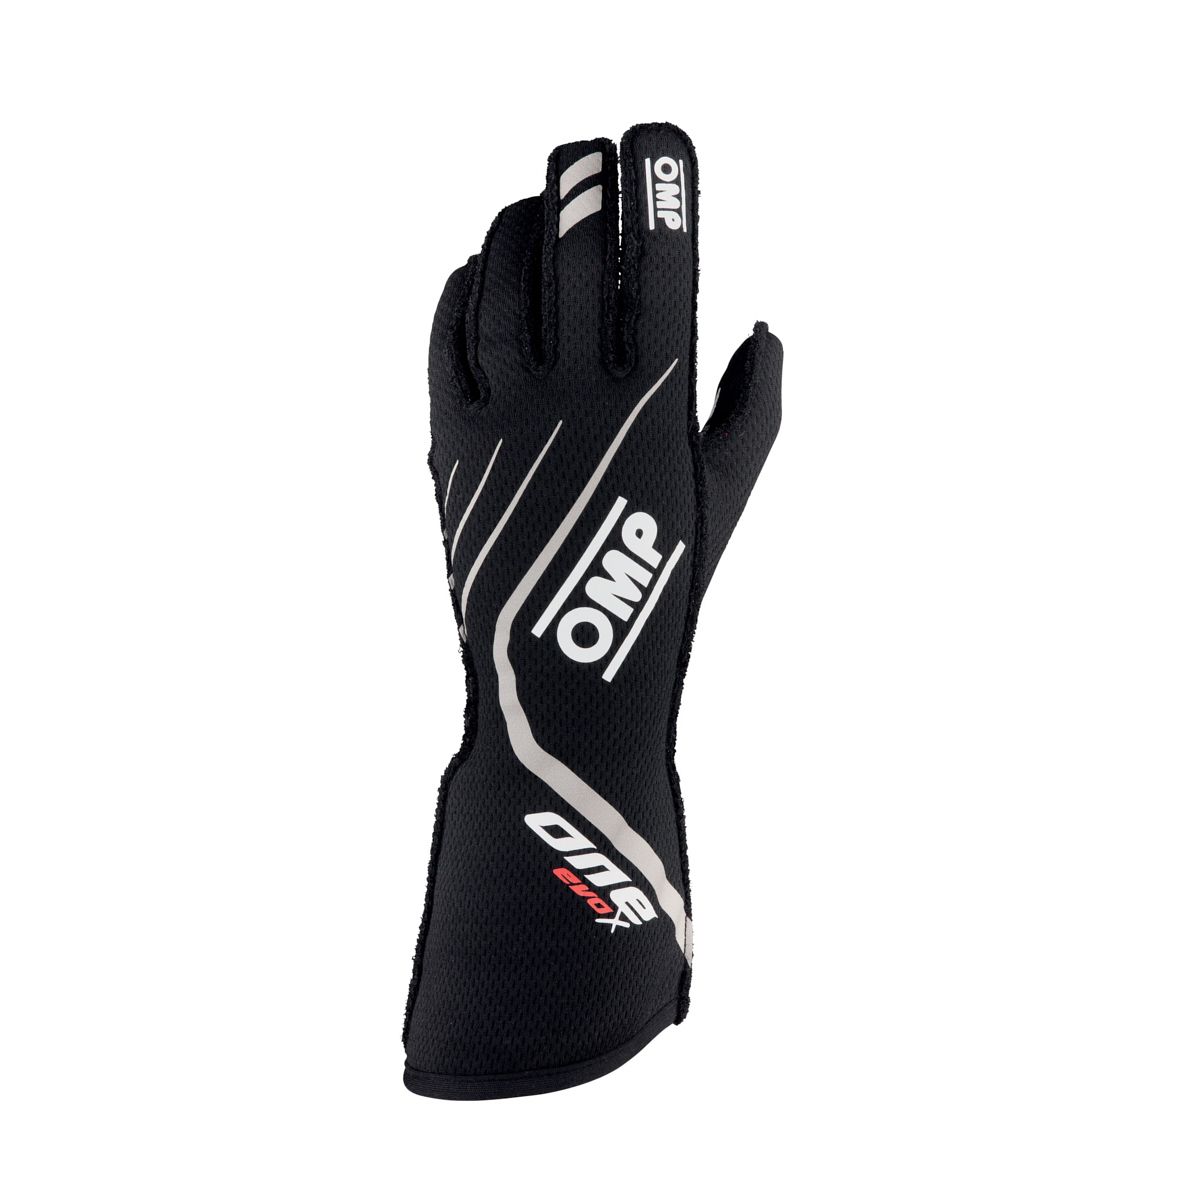 OMP Racing IB771NXL Driving Gloves, One EVO X, FIA Approved, Double Layer, Fire Retardant Fabric, Black, X-Large, Pair